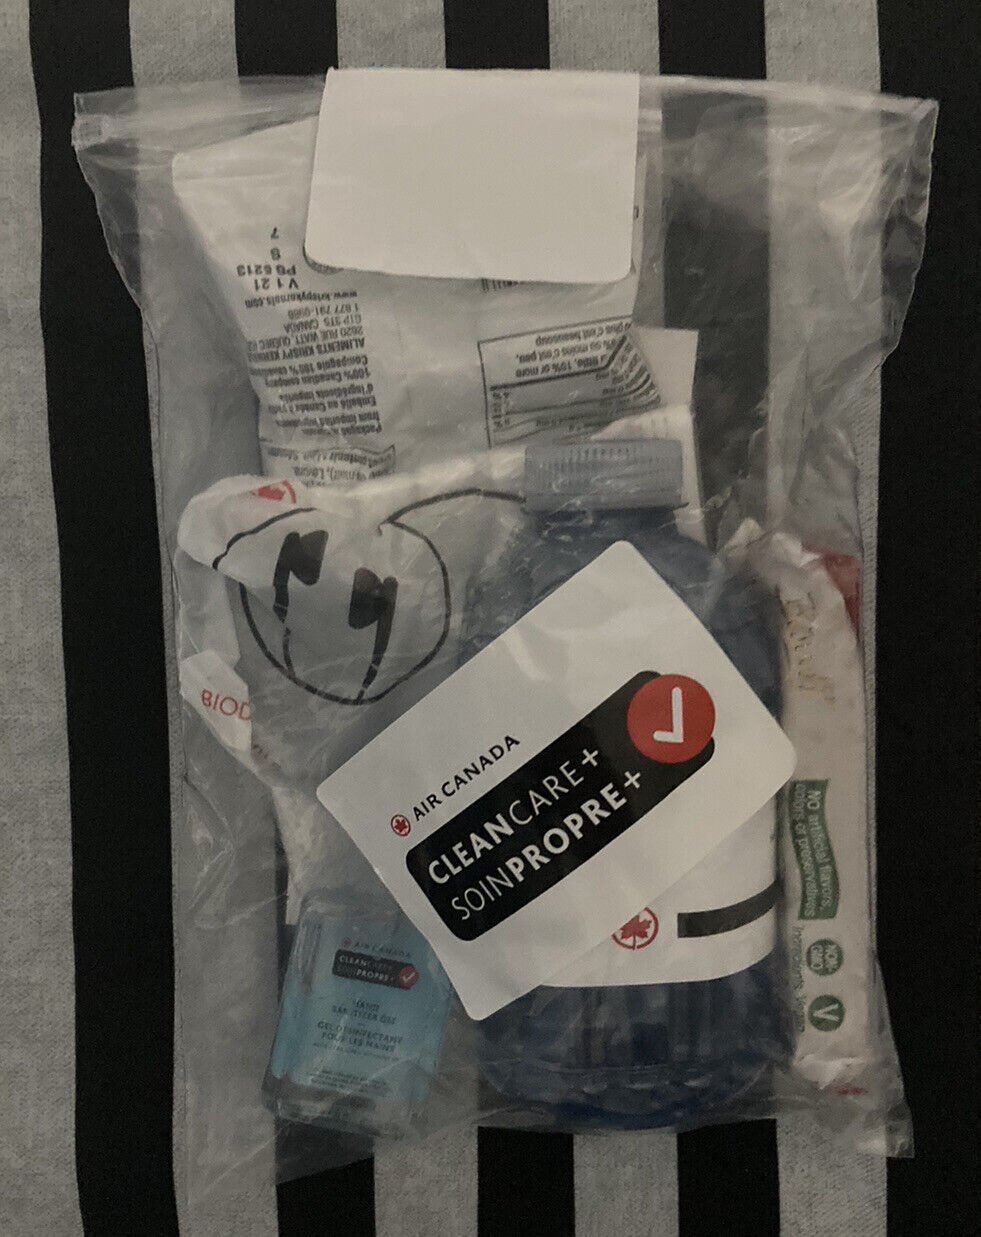 Air Canada Unopened Clean Care Kit 